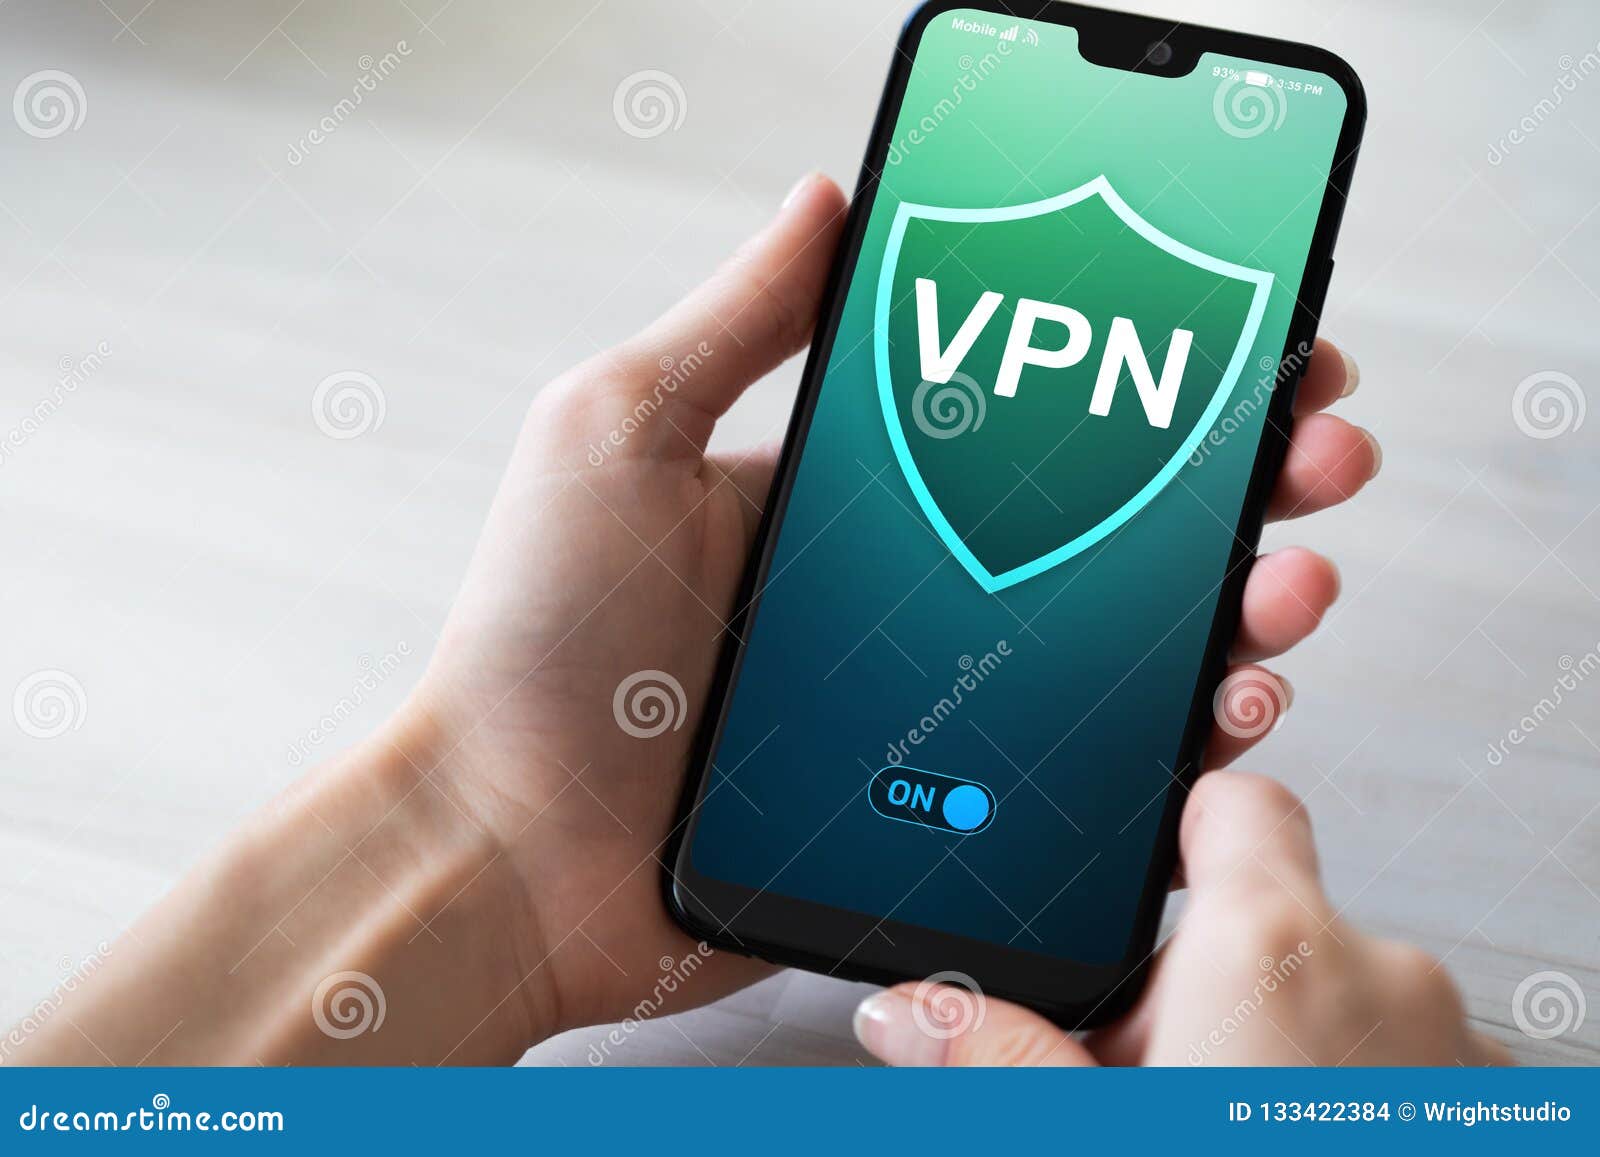 vpn virtual private network, anonymous and secure internet access. technology concept.